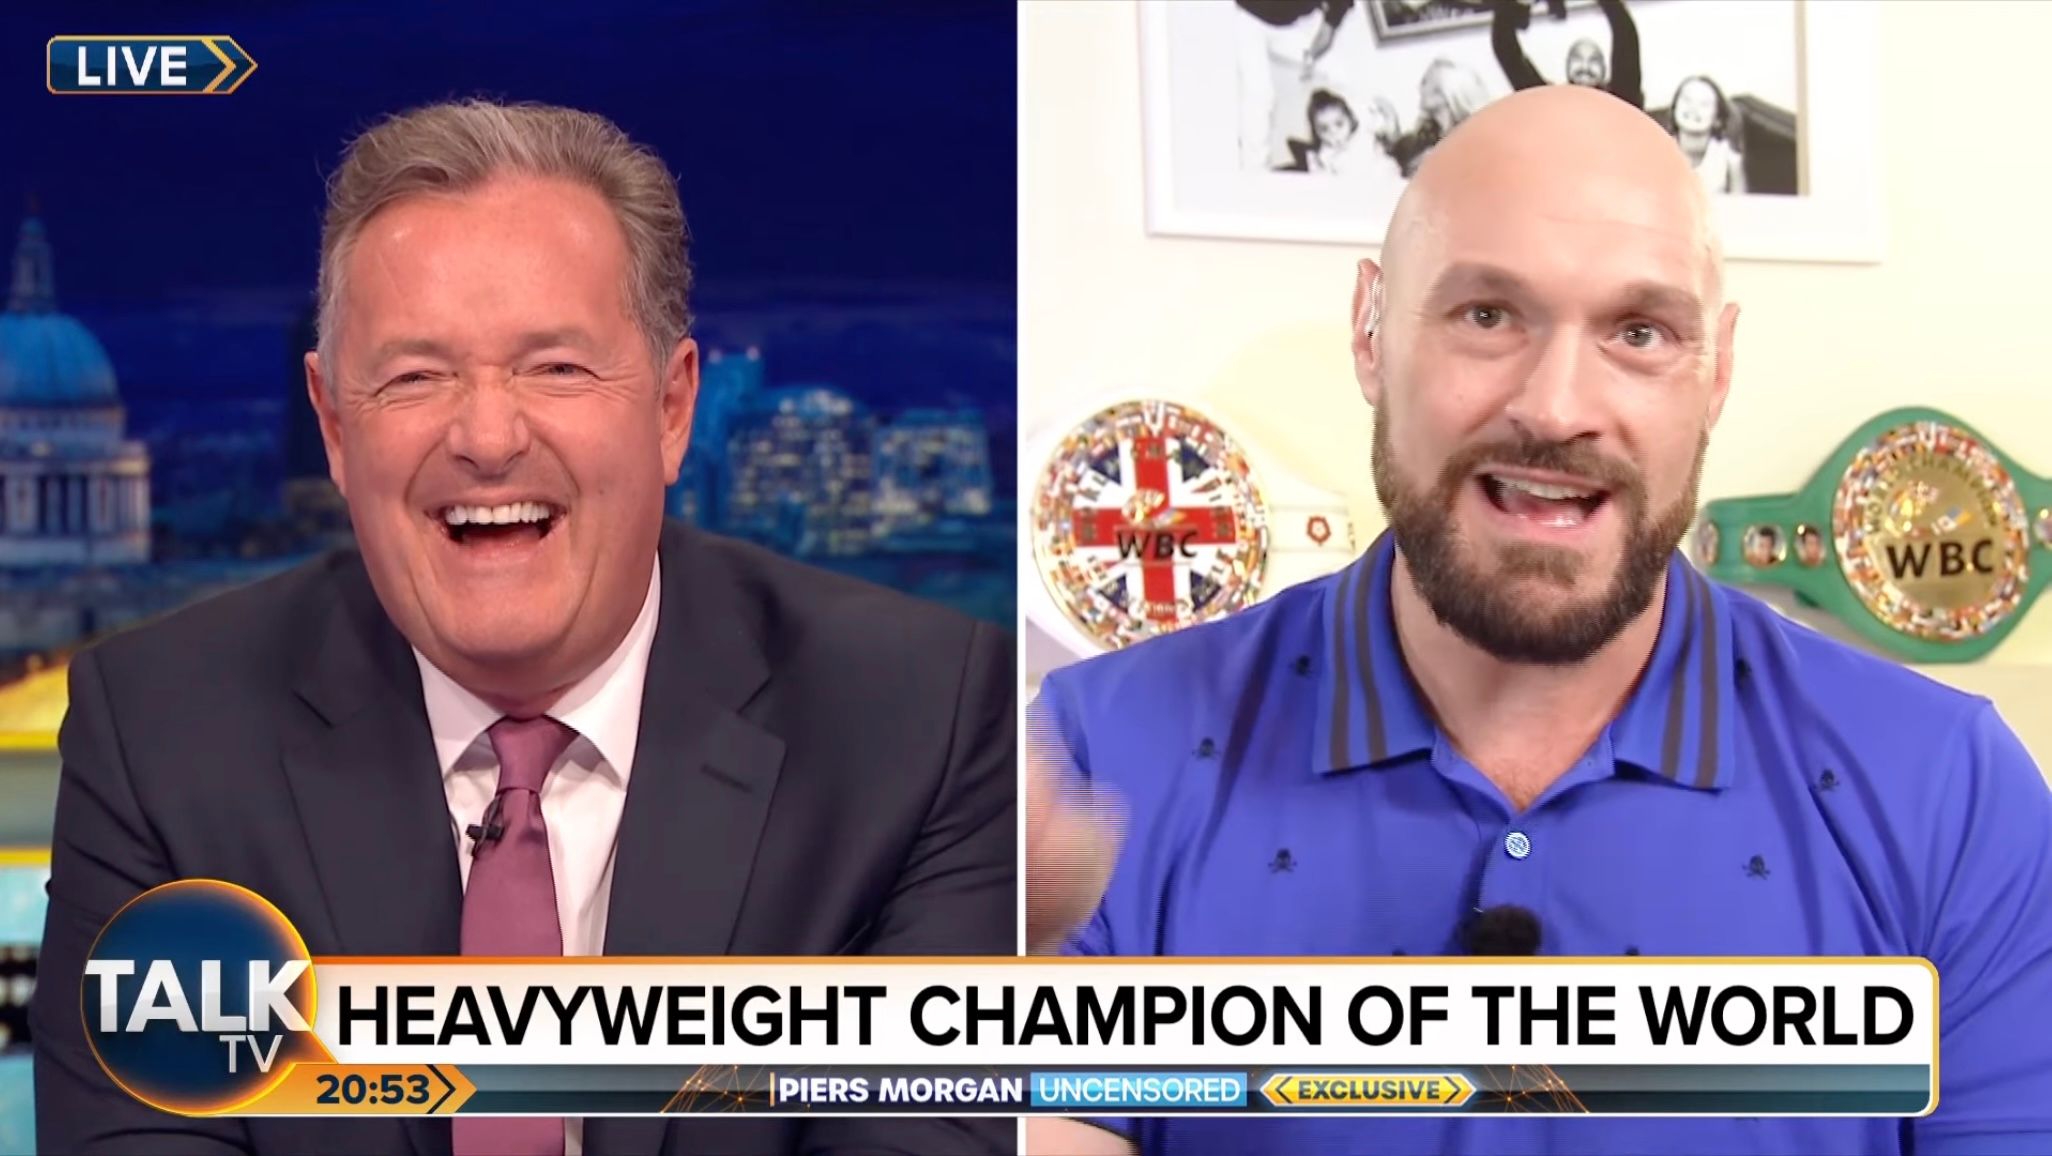 What has Tyson Fury said about Mike Tyson plane incident?